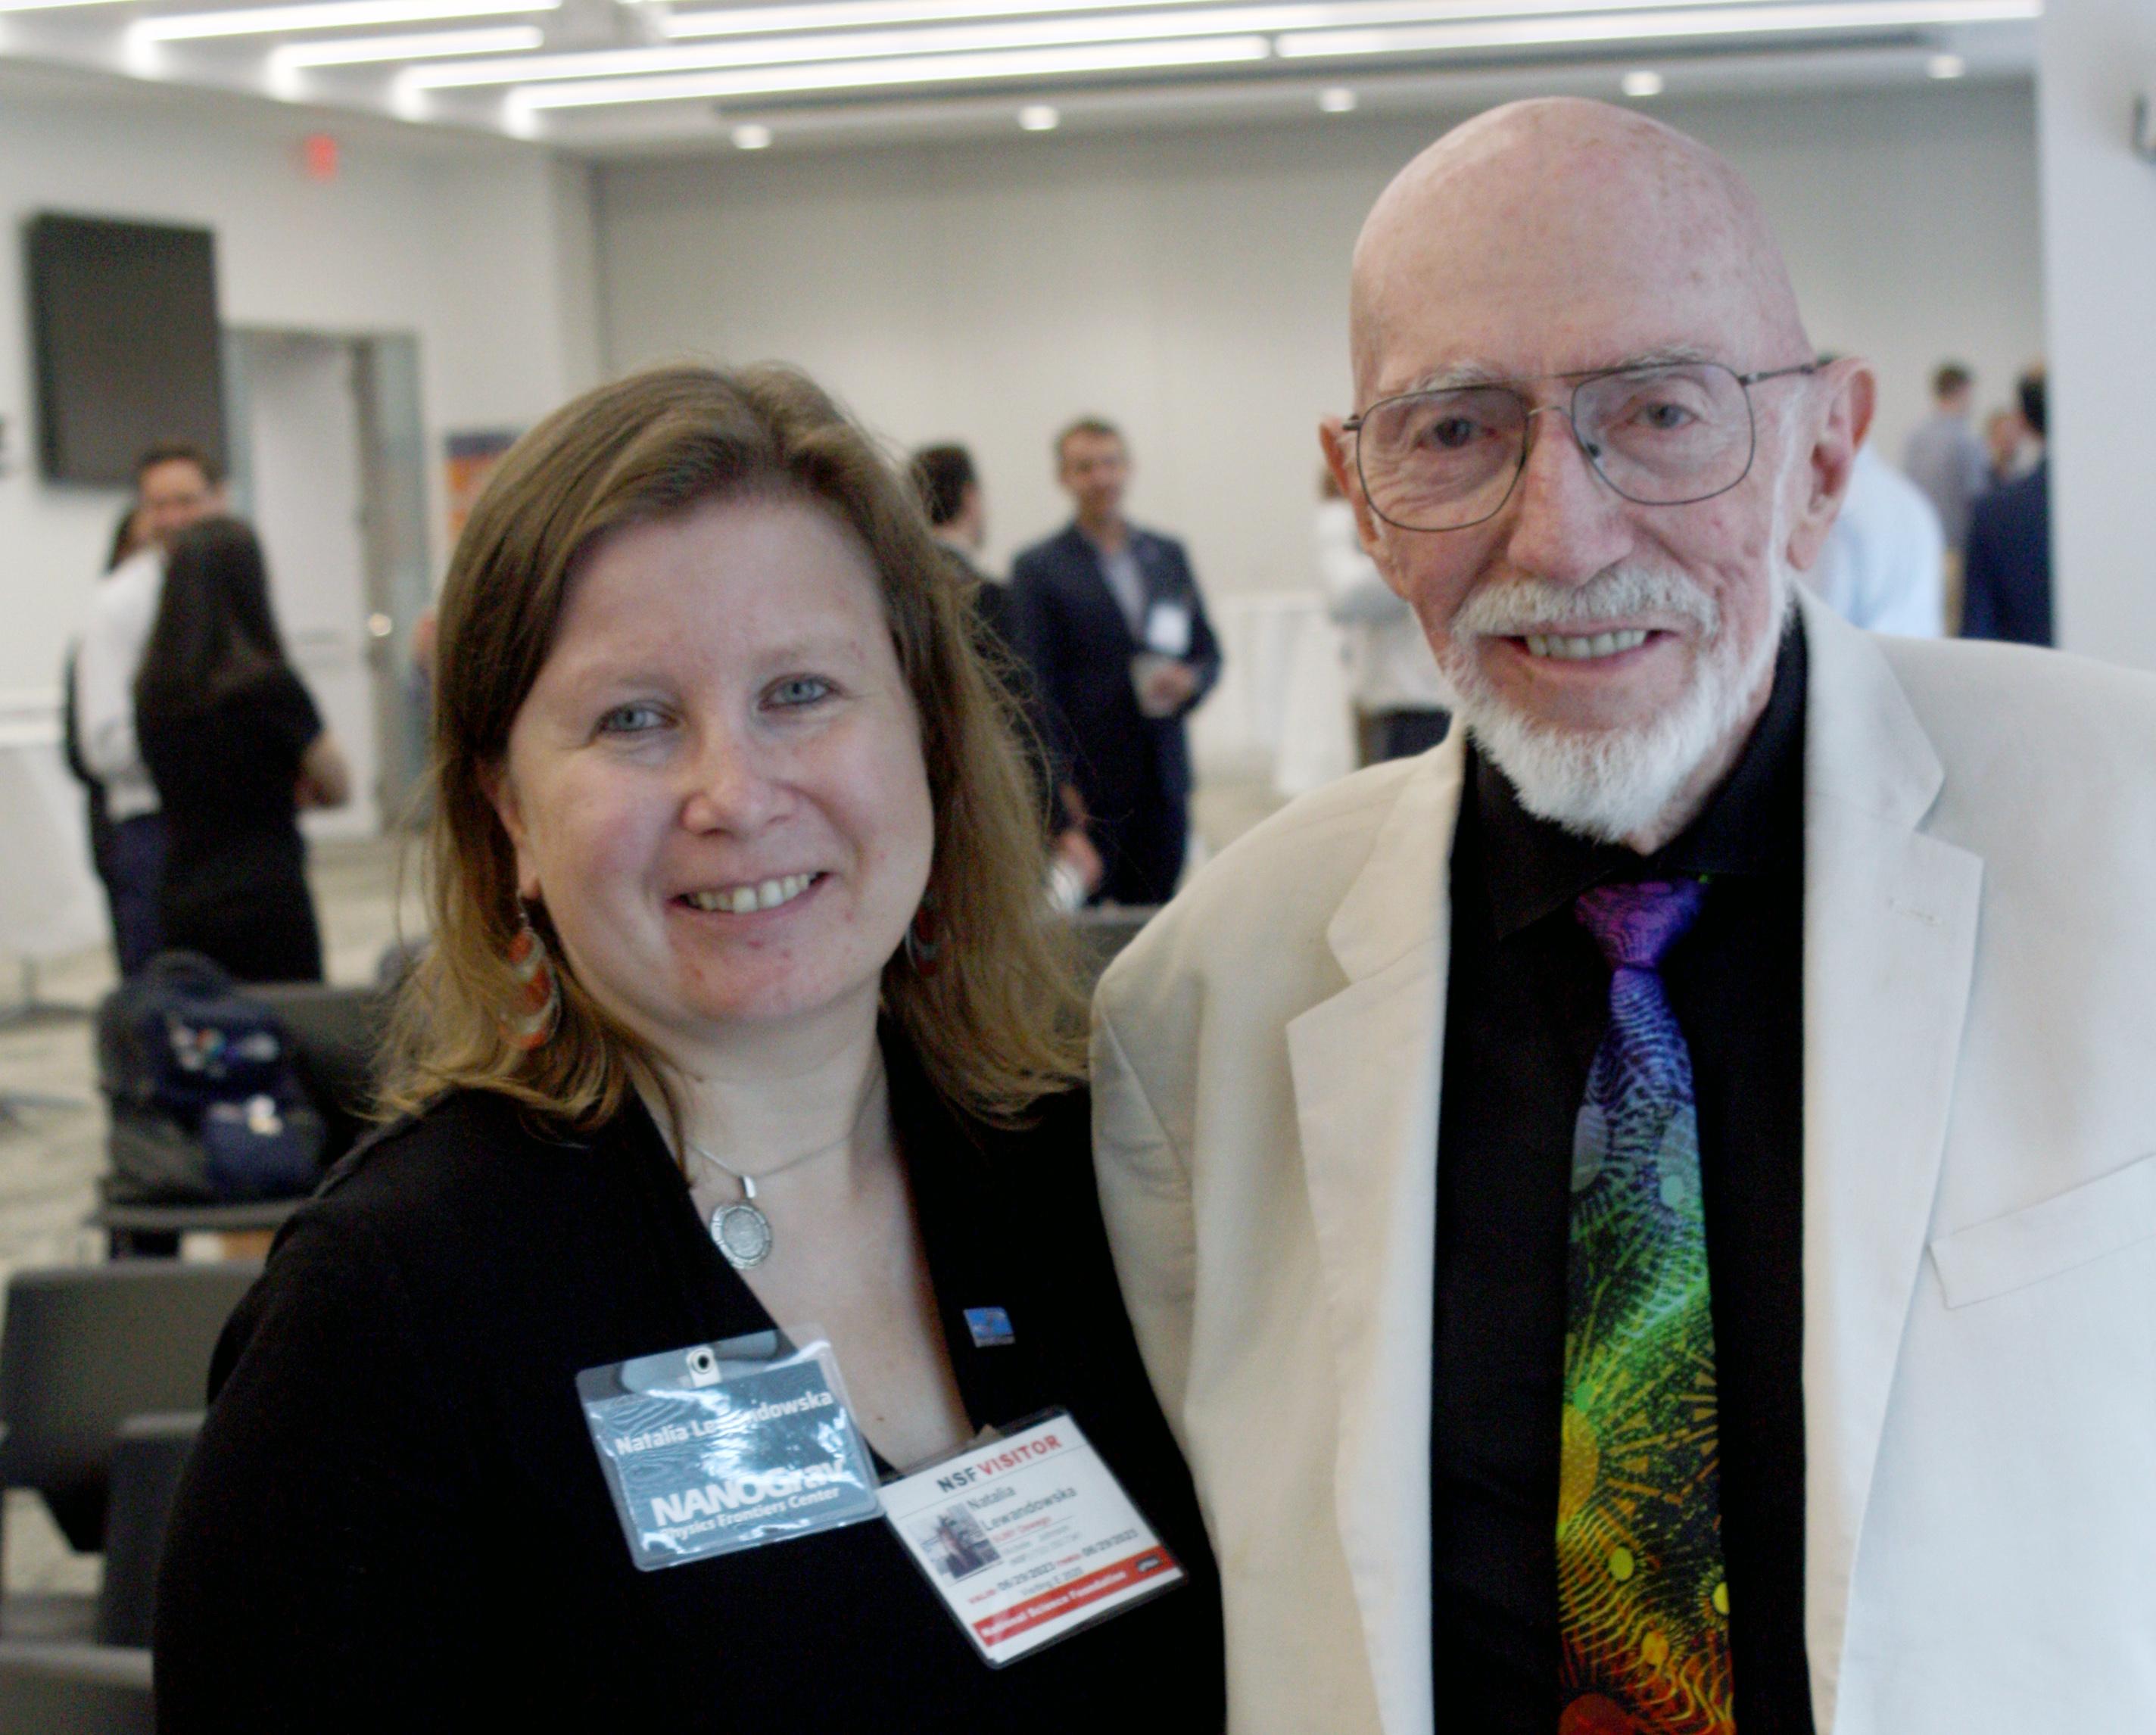 SUNY Oswego faculty member and planetarium director Natalie Lewandowska had the opportunity to meet Nobel Prize recipient and physicist Kip Thorne